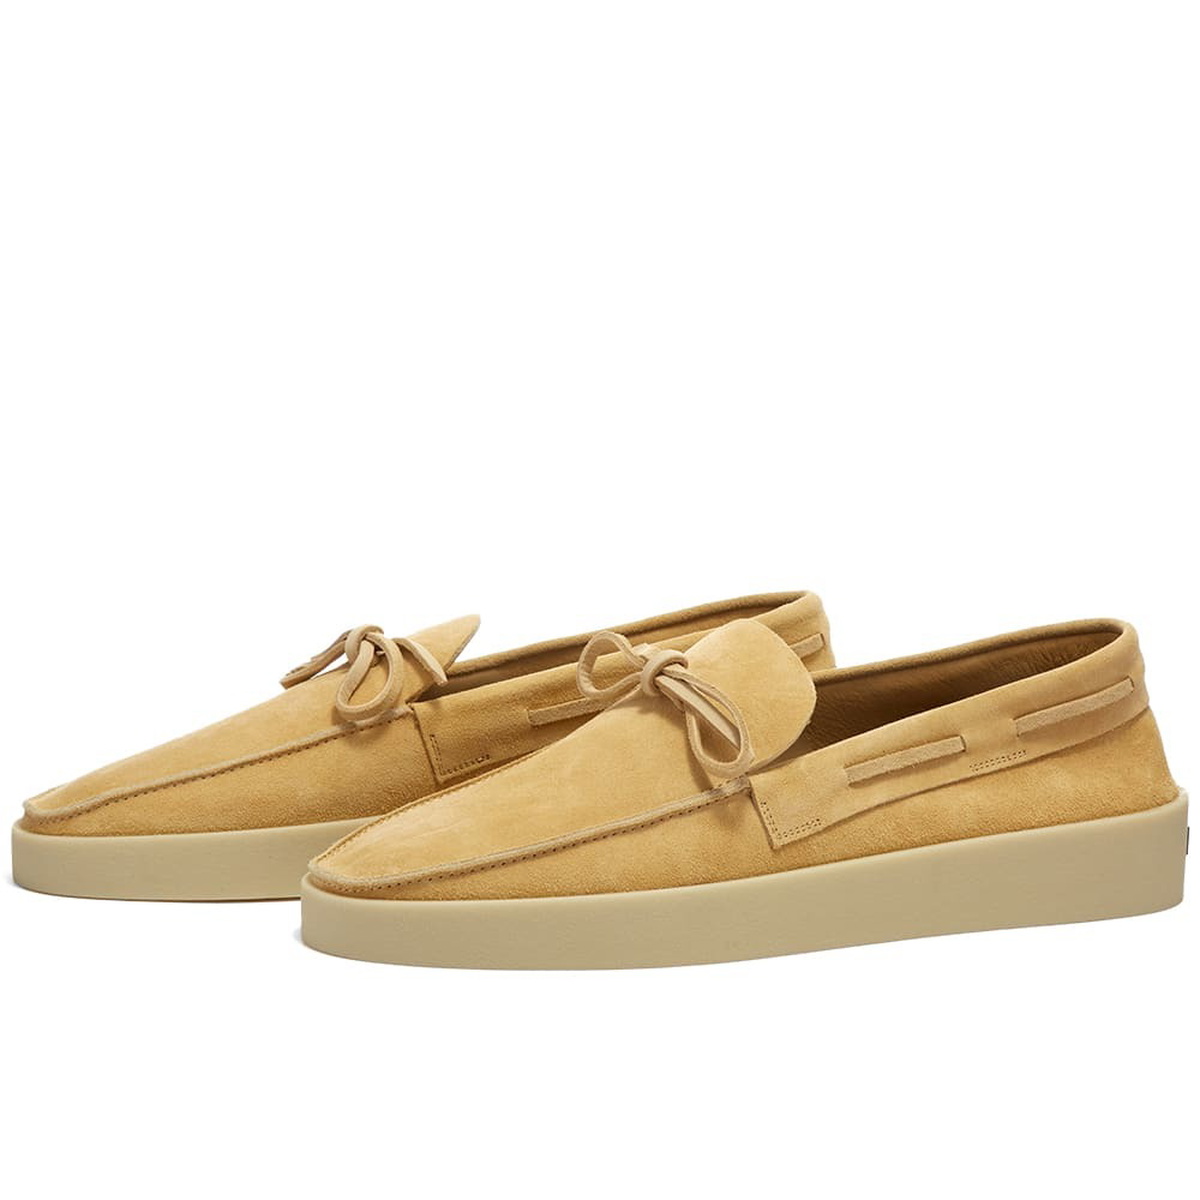 Fear of God x Zegna Suede Driving Loafer